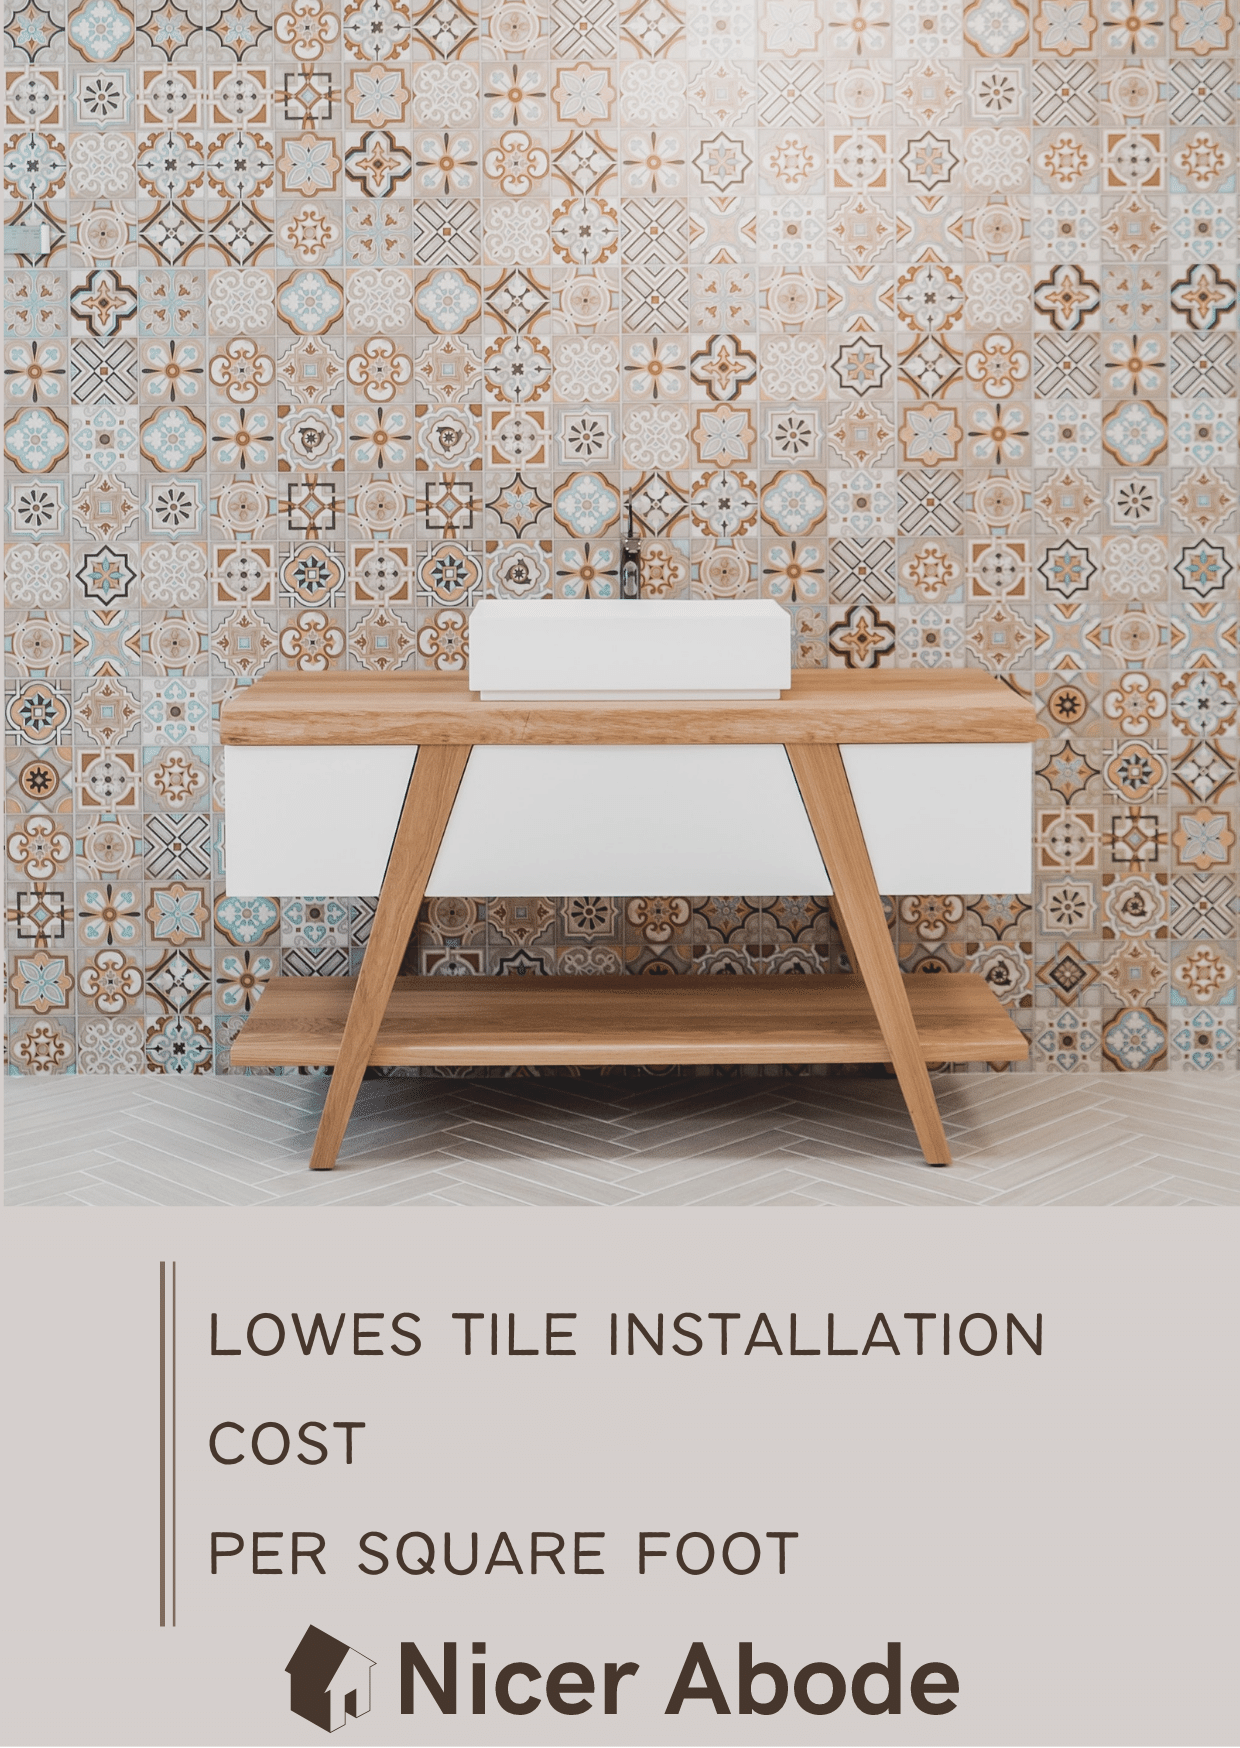 lowes-tile-installation-cost-per-square-foot